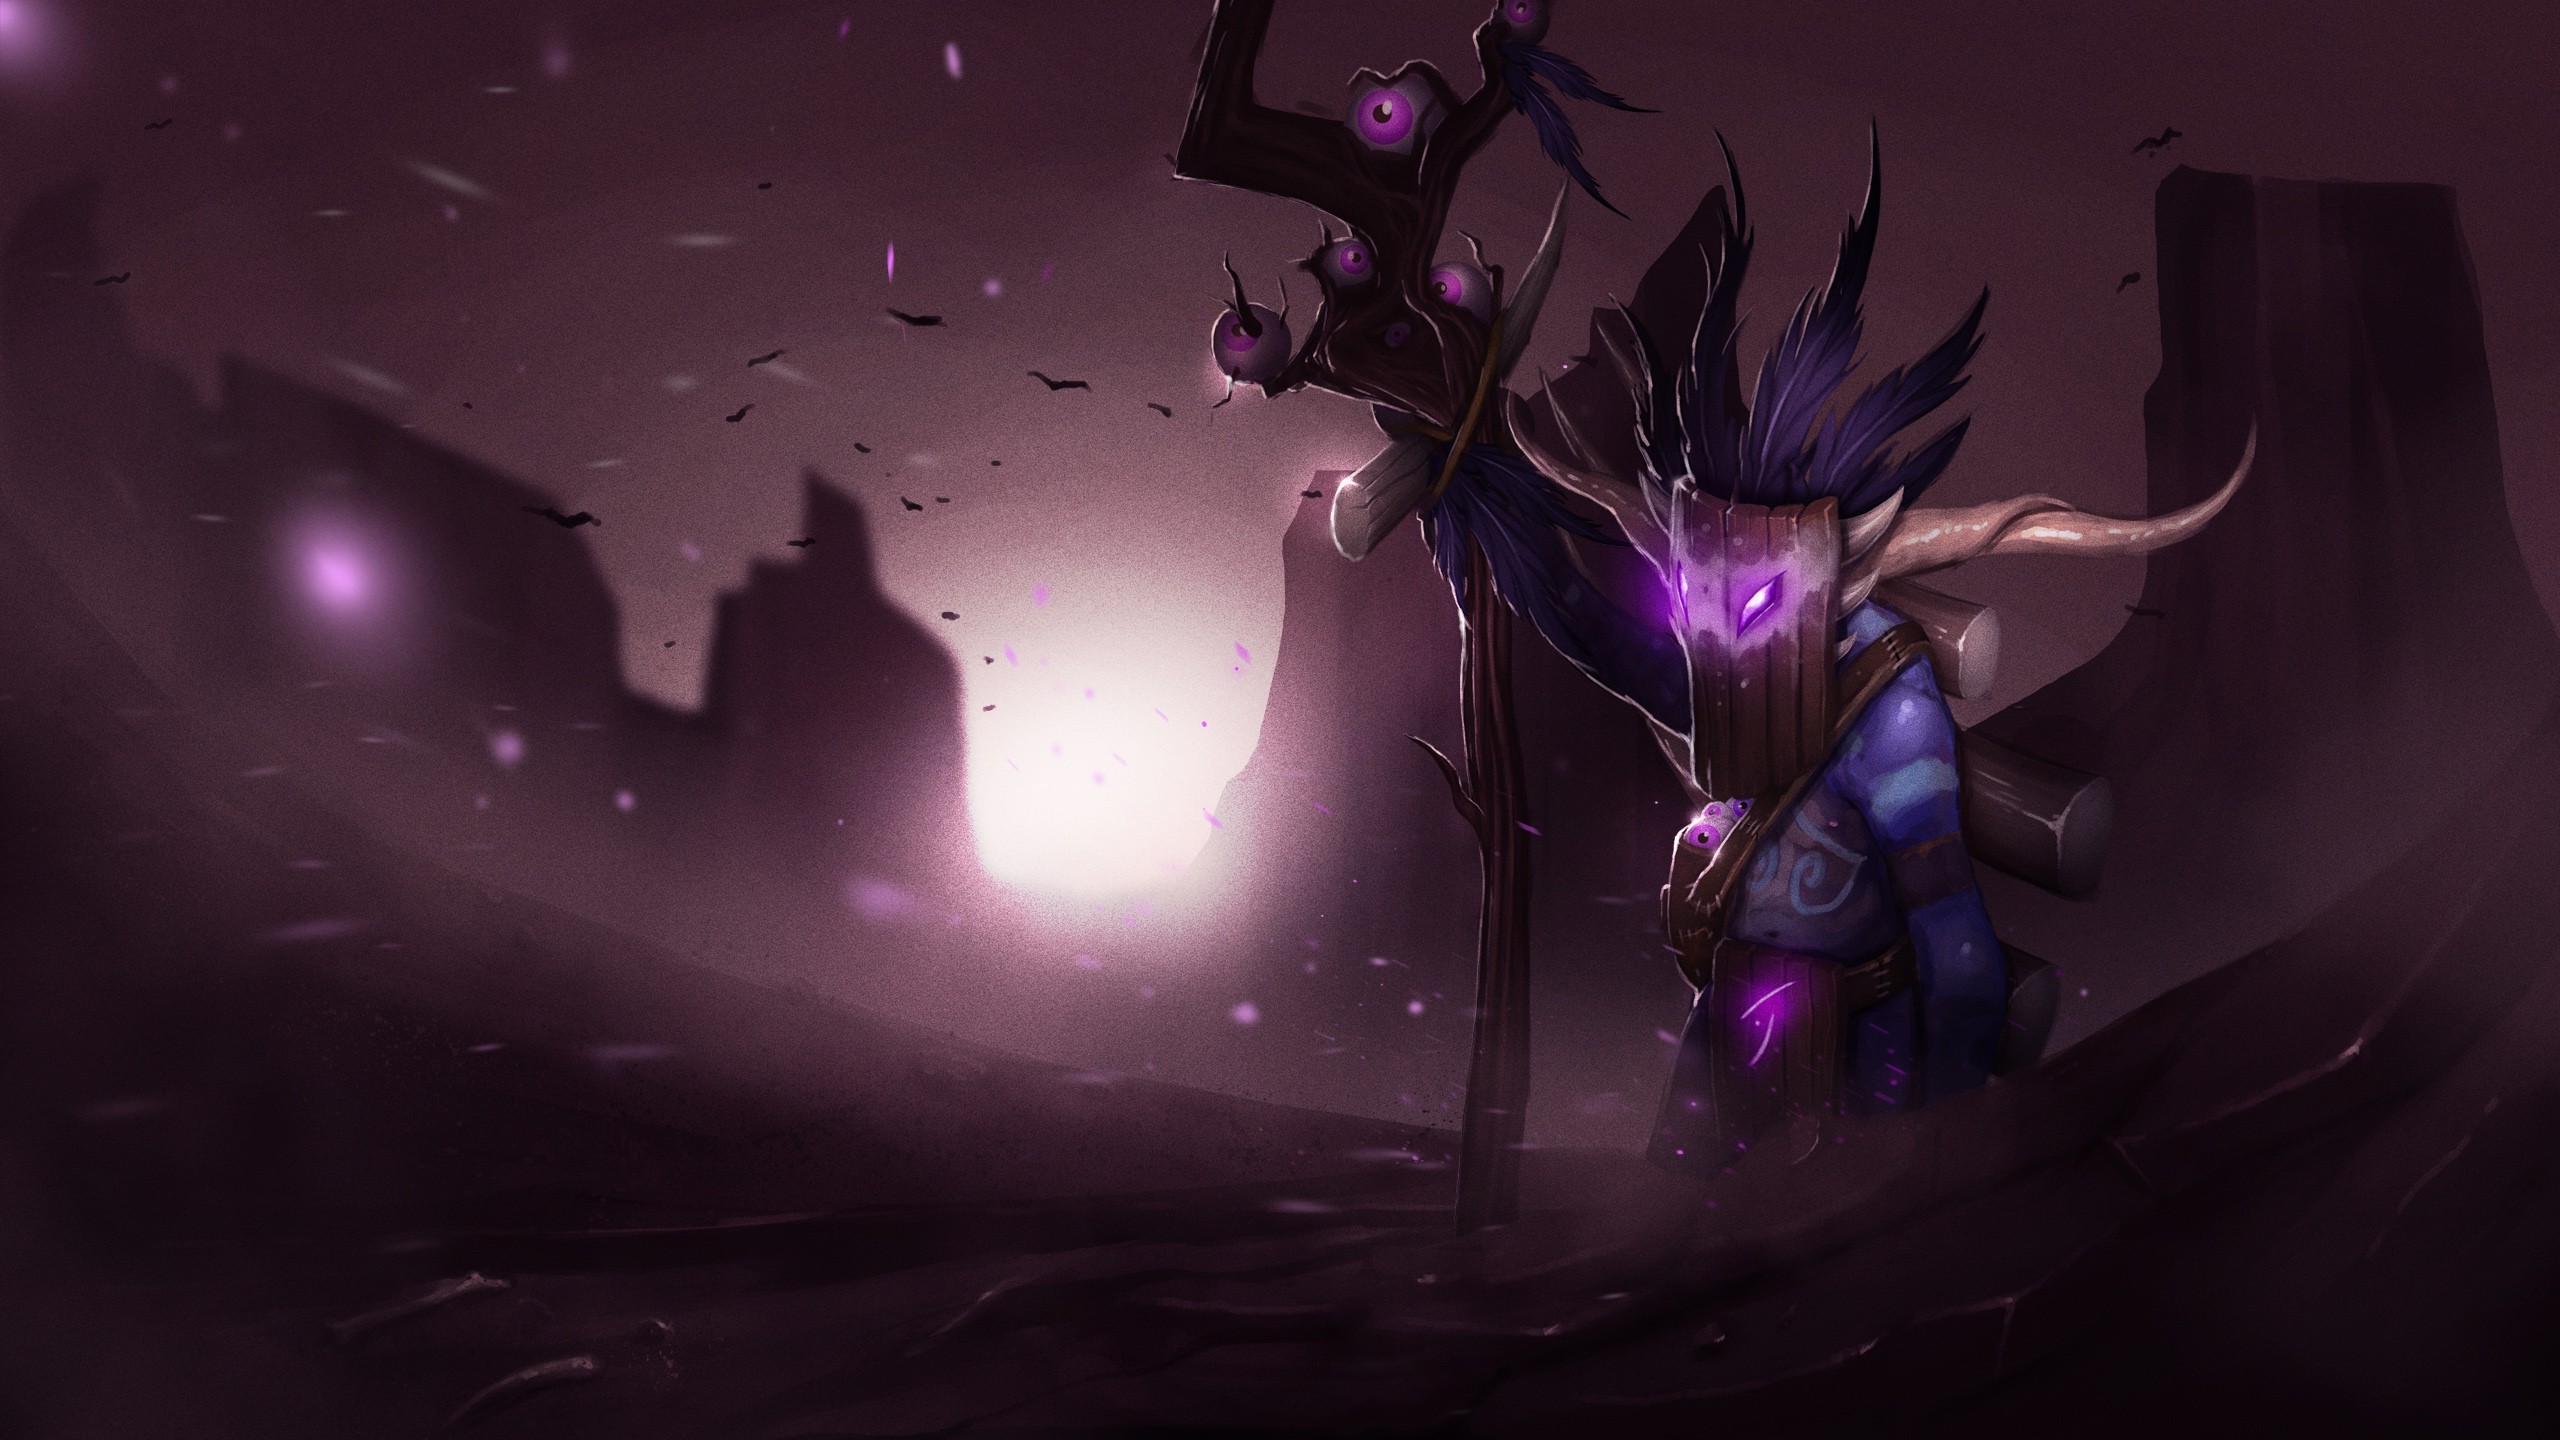 Dota 2, Dota, Defense Of The Ancients, Valve, Valve Corporation, Witch Doctor (character) Wallpaper